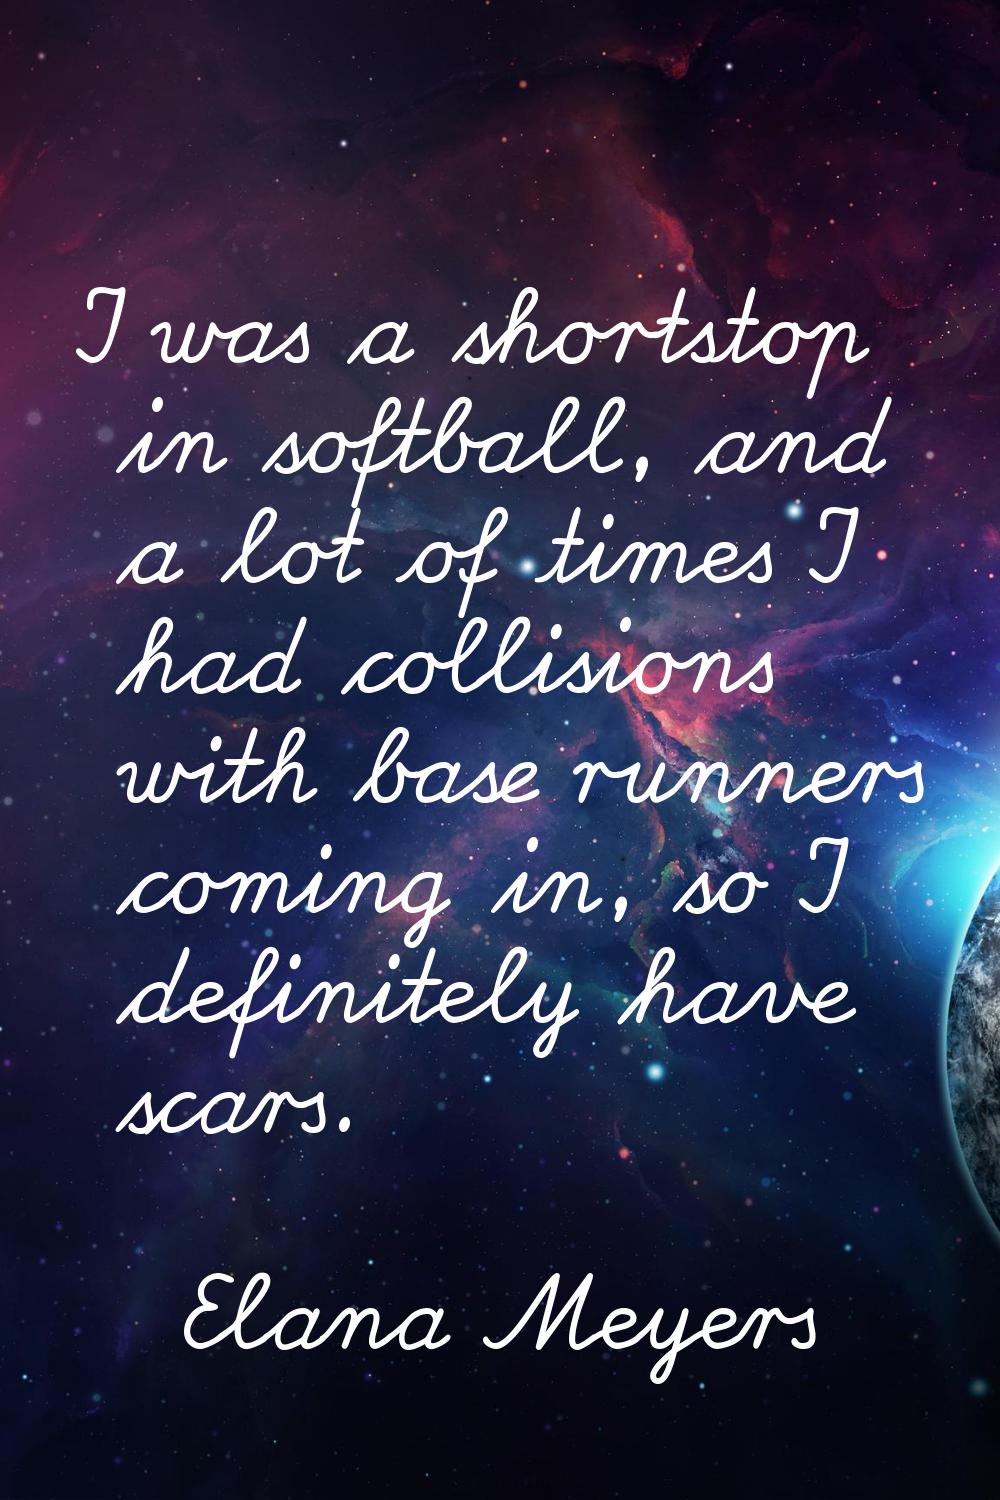 I was a shortstop in softball, and a lot of times I had collisions with base runners coming in, so 